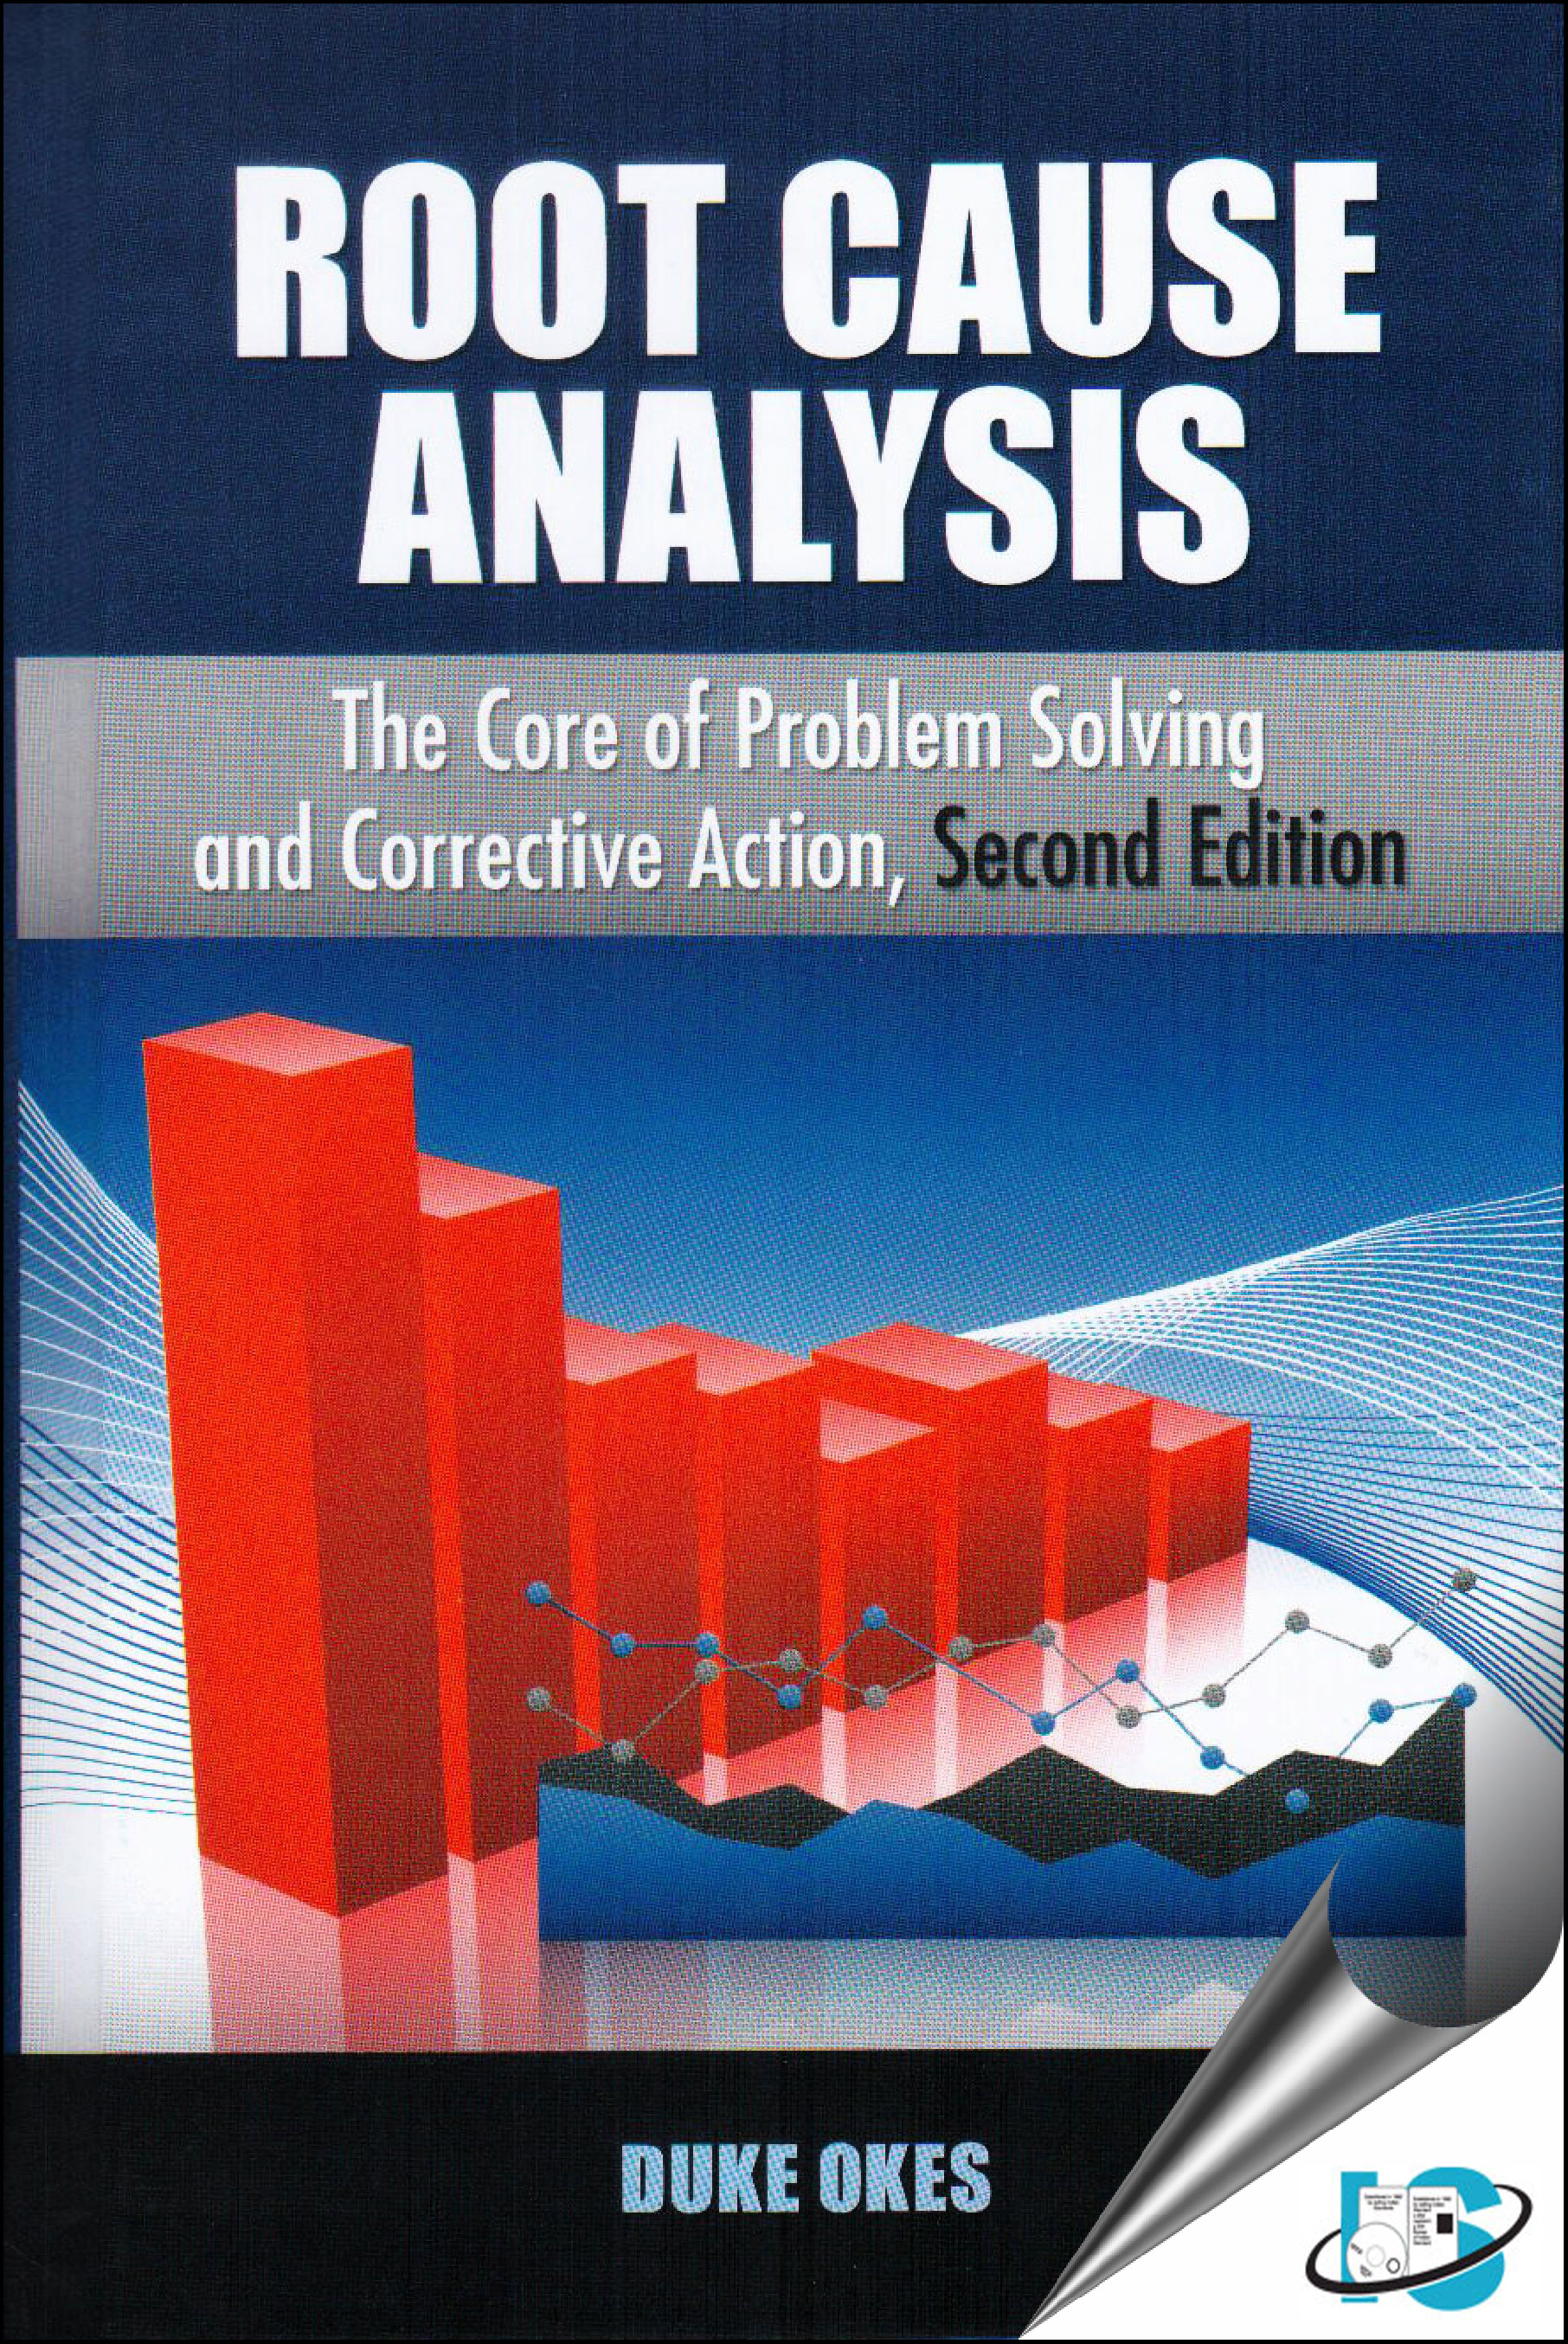 root cause analysis the core of problem solving and corrective action pdf